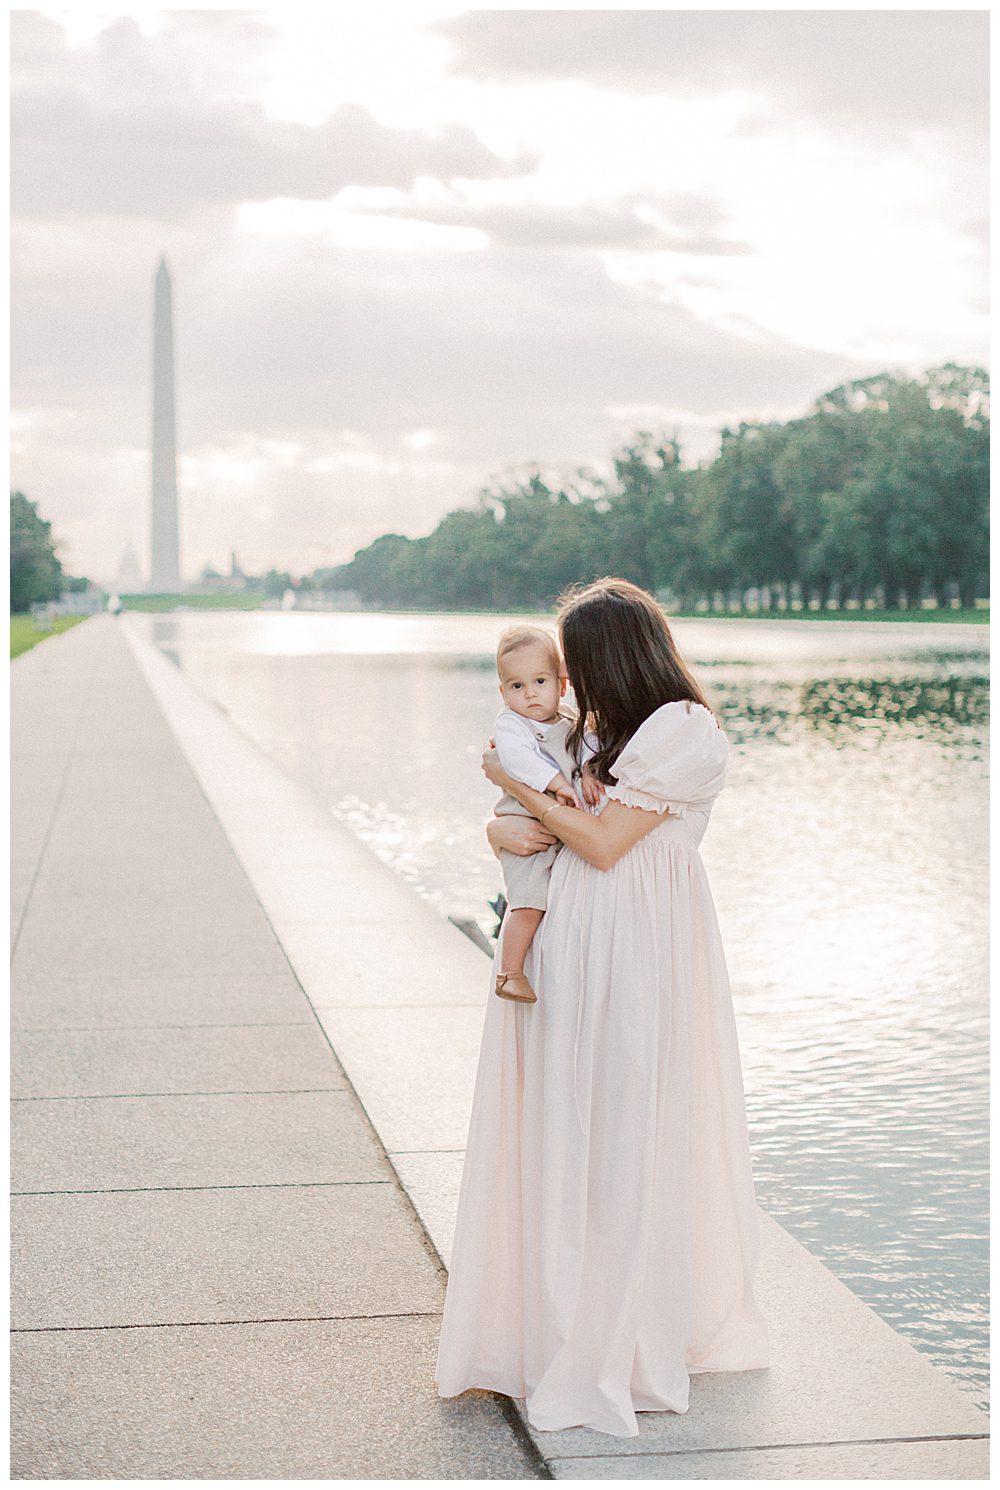 Mother leans into toddler son at reflecting pool during DC Monuments Family Photo Session.